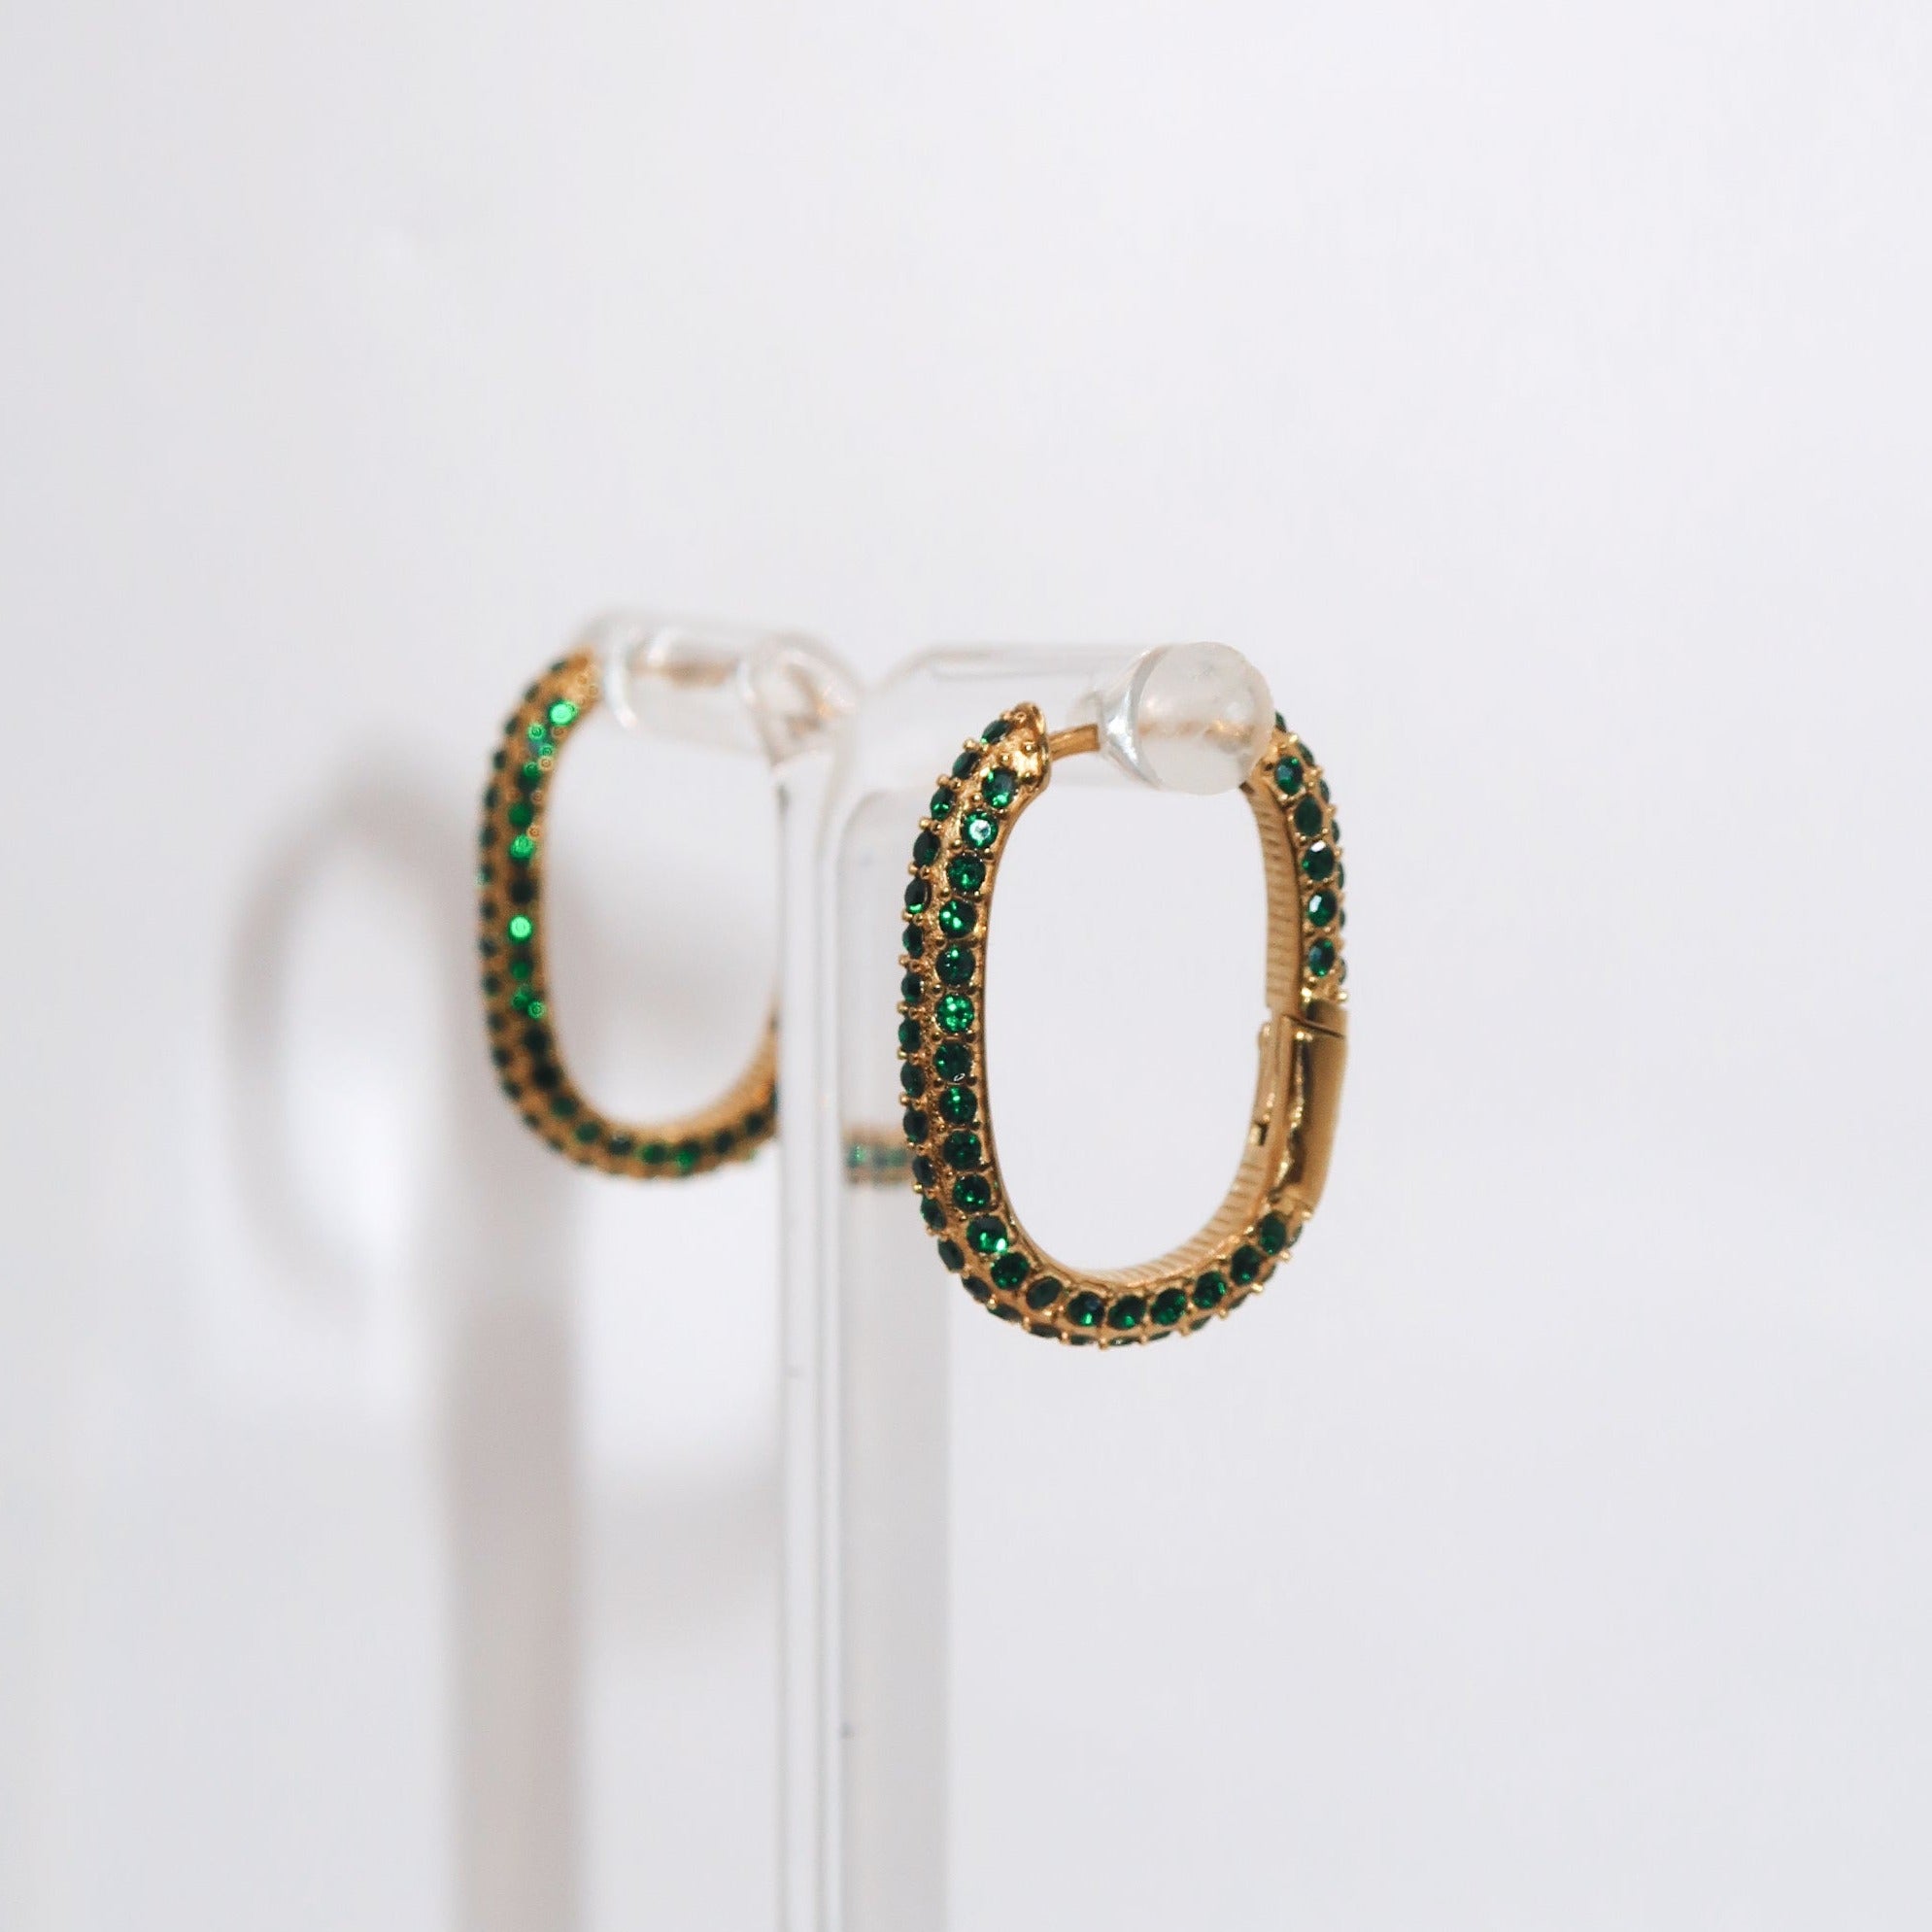 TEAGAN - 18K PVD Gold Plated Rectangular Hoop Earrings with Emerald CZ Stones - Mixed Metals